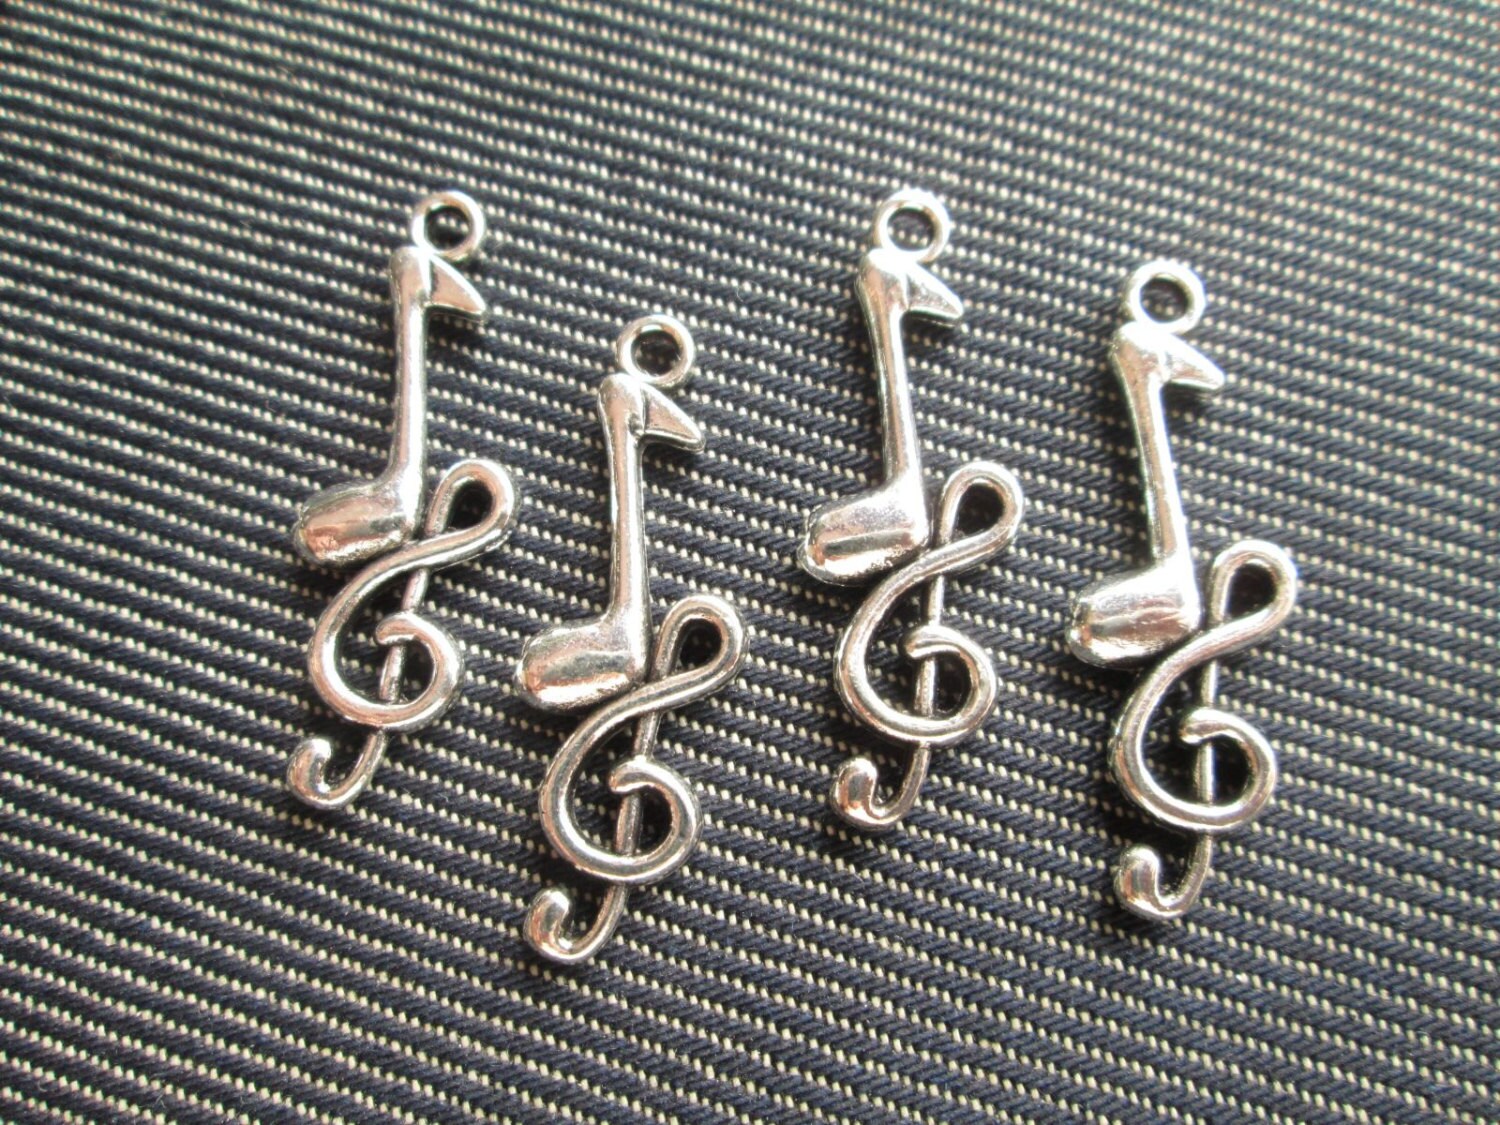 10 Silver Treble Clef Music Charms - CT - 0224 from ChokkoThings on ...